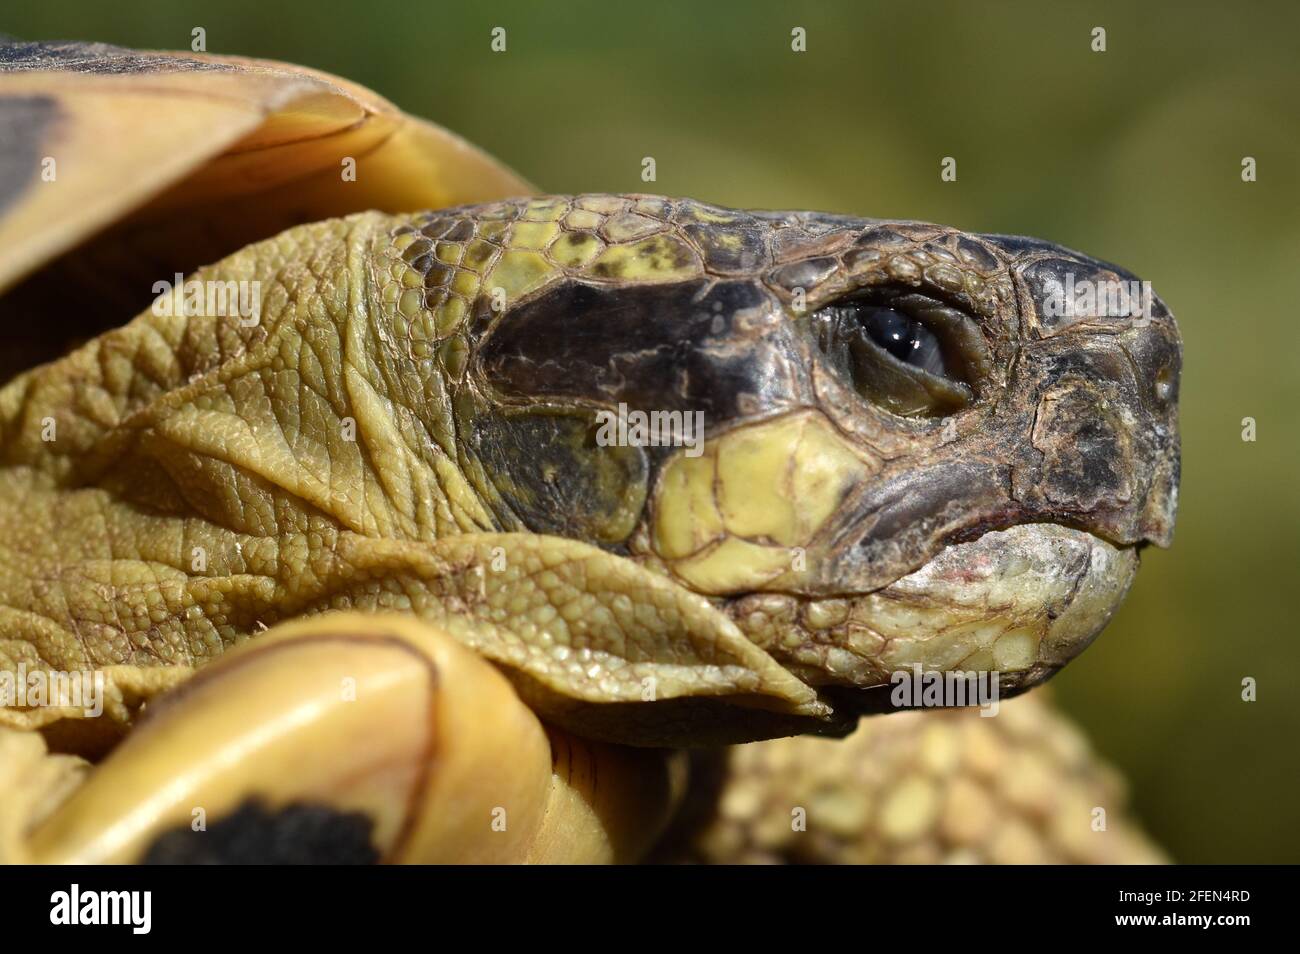 France, south-eastern, terrestrial turtle of mediterranean region, this reptile is well adapted to the climate of ths region. Stock Photo